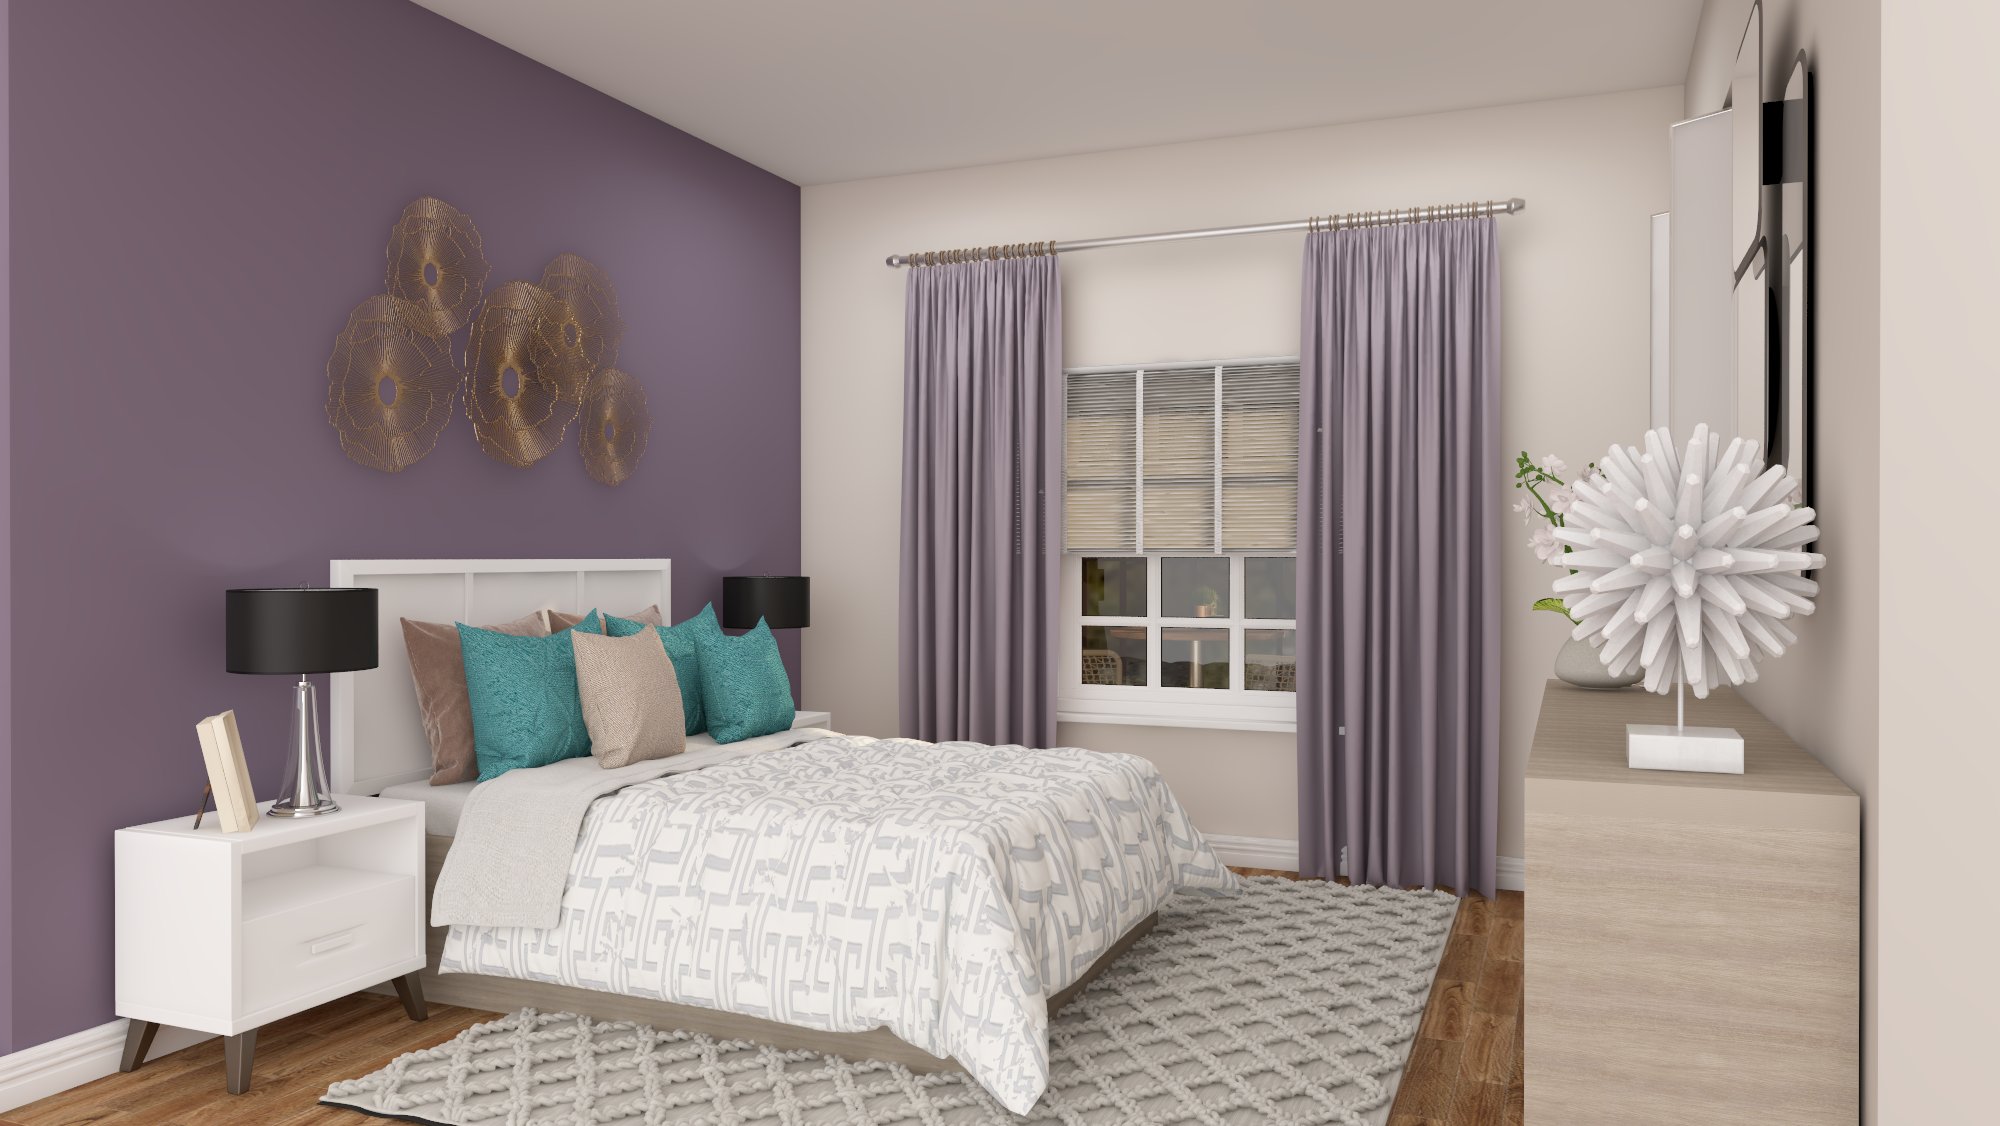 35 Best Bedroom Color Schemes And Ideas For Your Home - Foyr